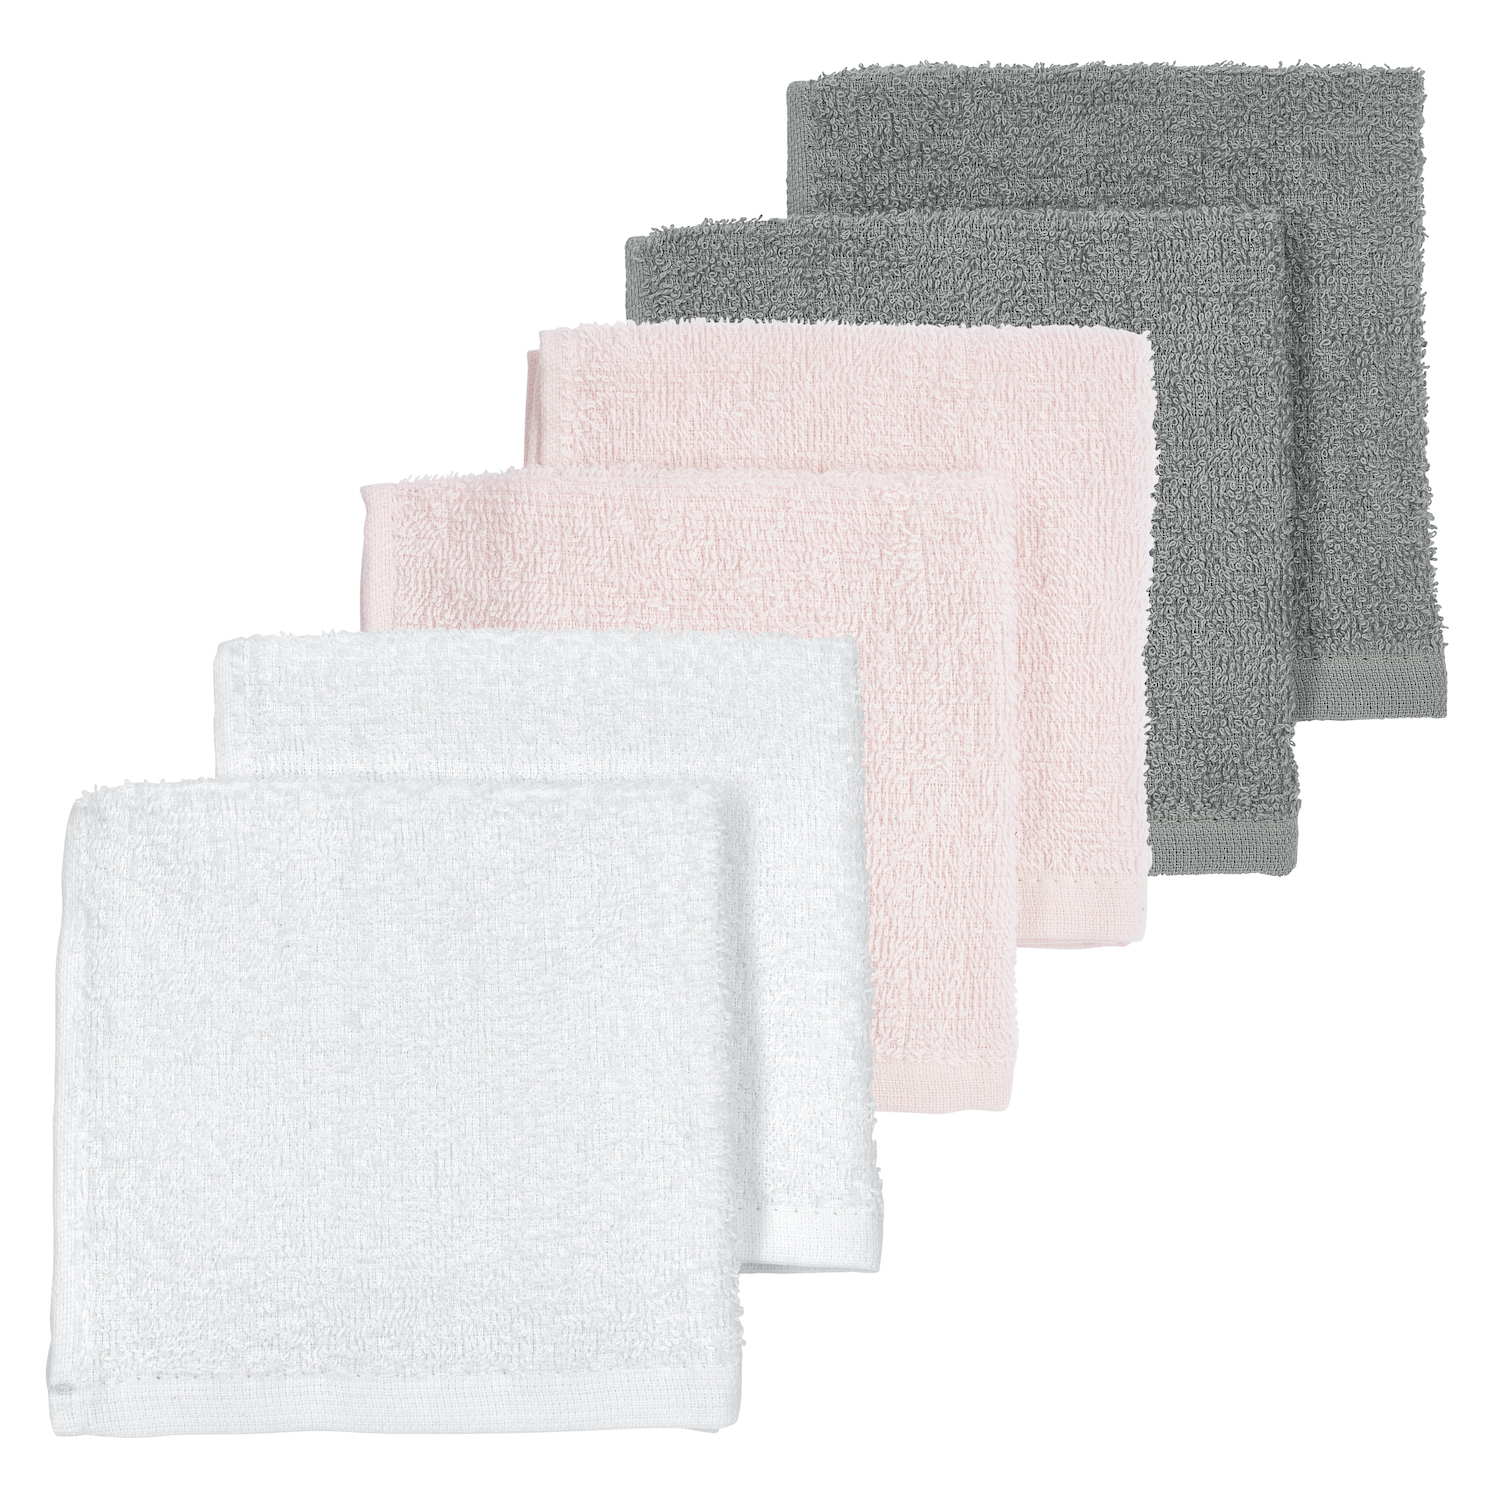 Basic Terry Face Cloths 6-pack  - White/Light Pink/Grey - 30x30cm